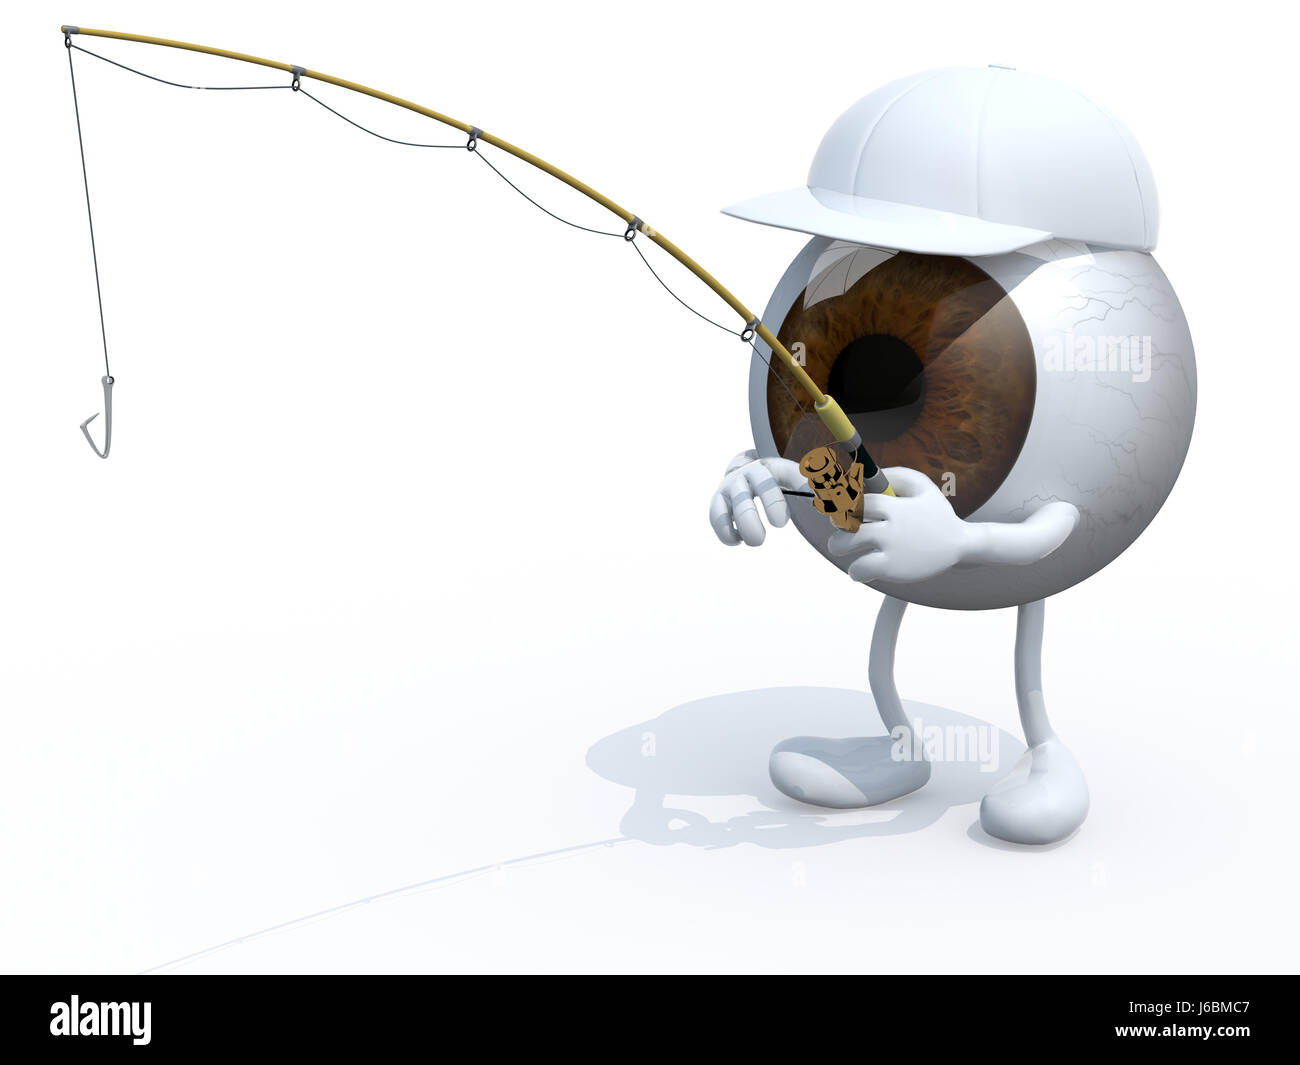 big eyeball with arms and legs and fishing pole on hand, 3d illustration Stock Photo